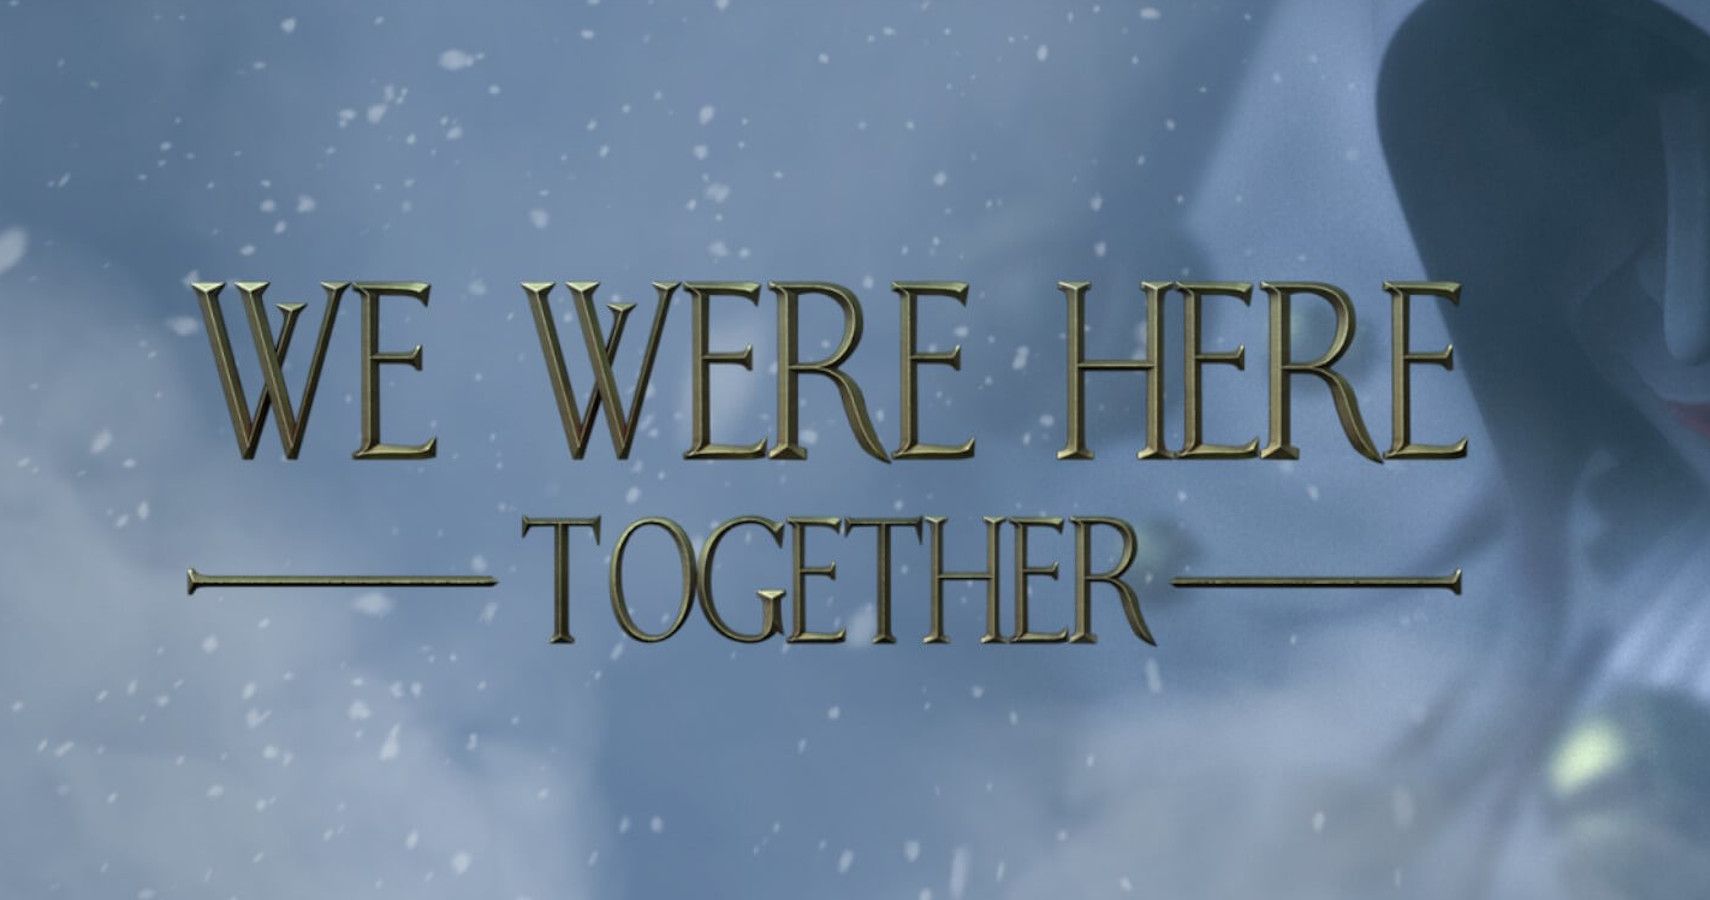 download free we were here together too